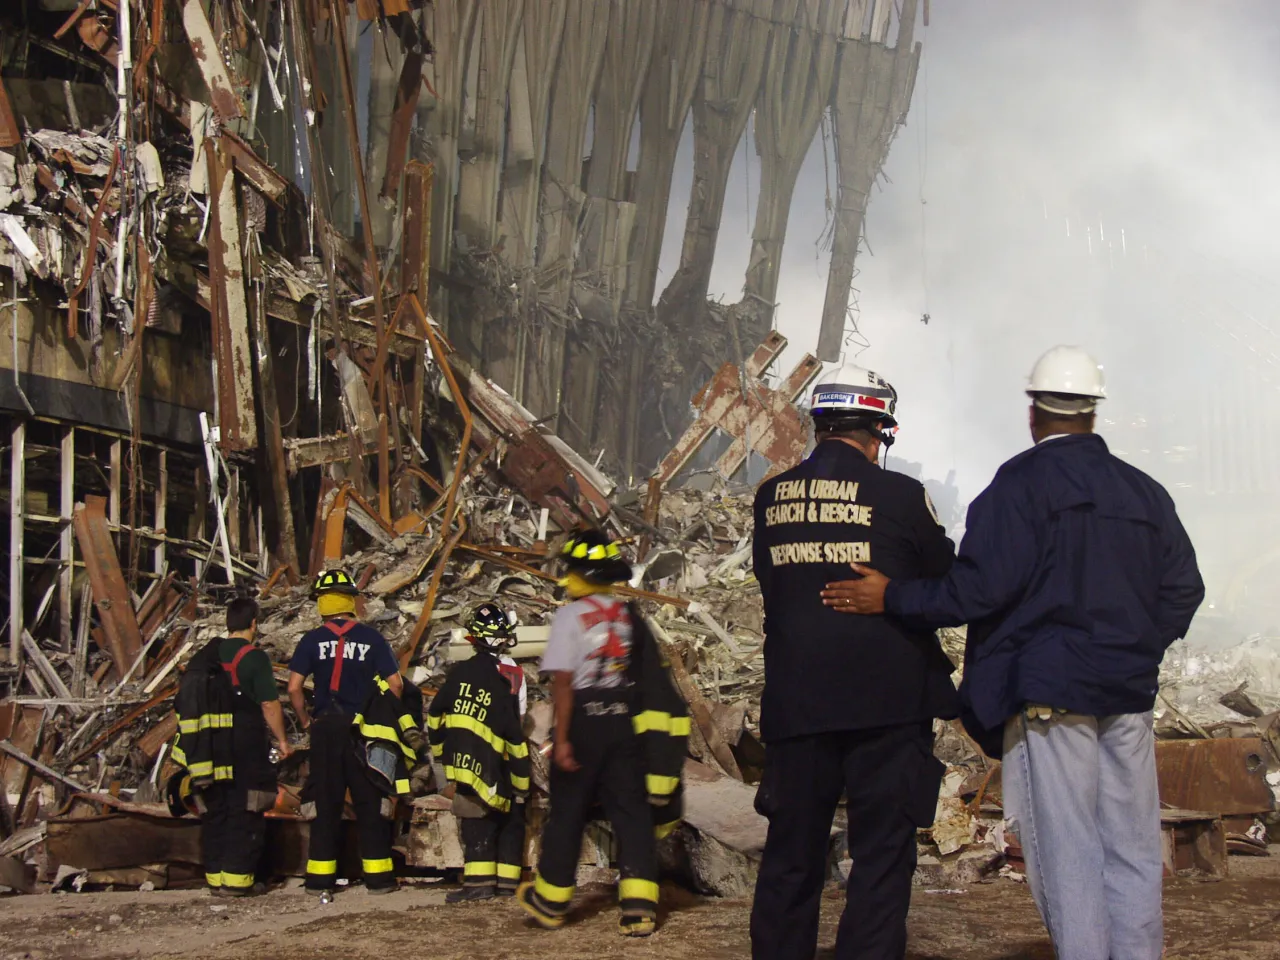 Image: 9/11 FEMA Officials and Urban Search and Rescue inspect Ground Zero